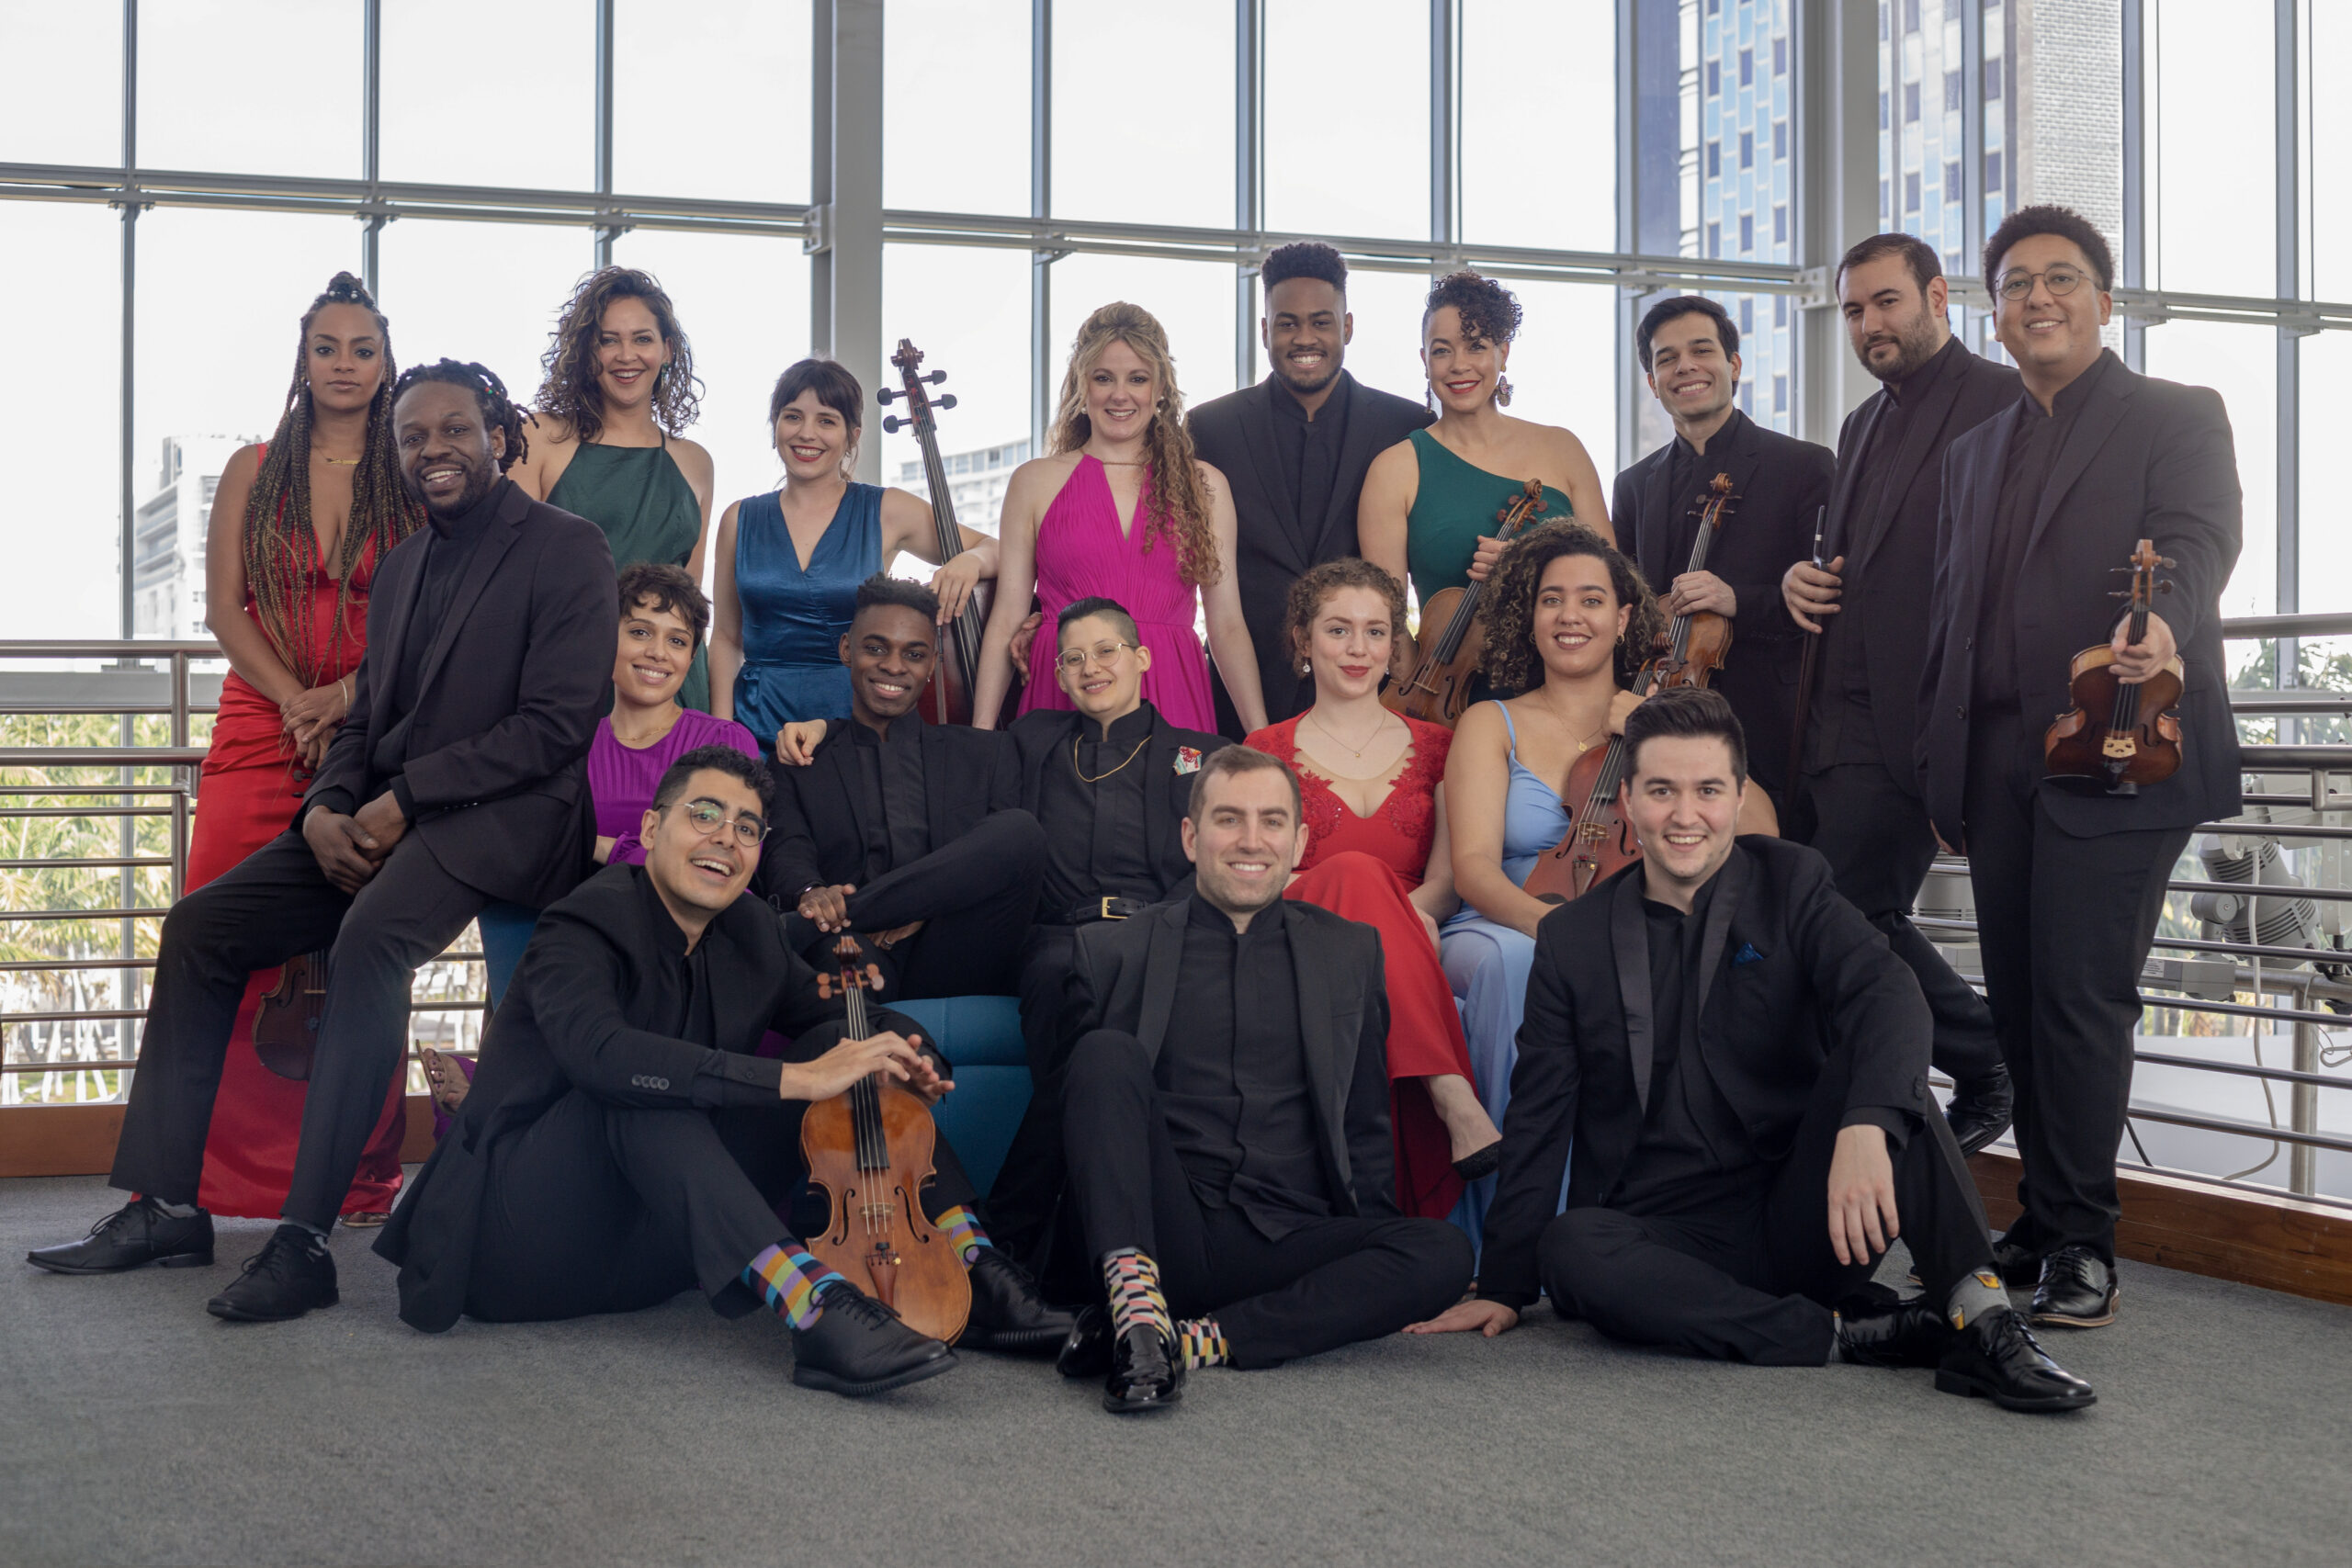 A large music ensemble poses for a group picture in front of floor to ceiling glass windows in a city.